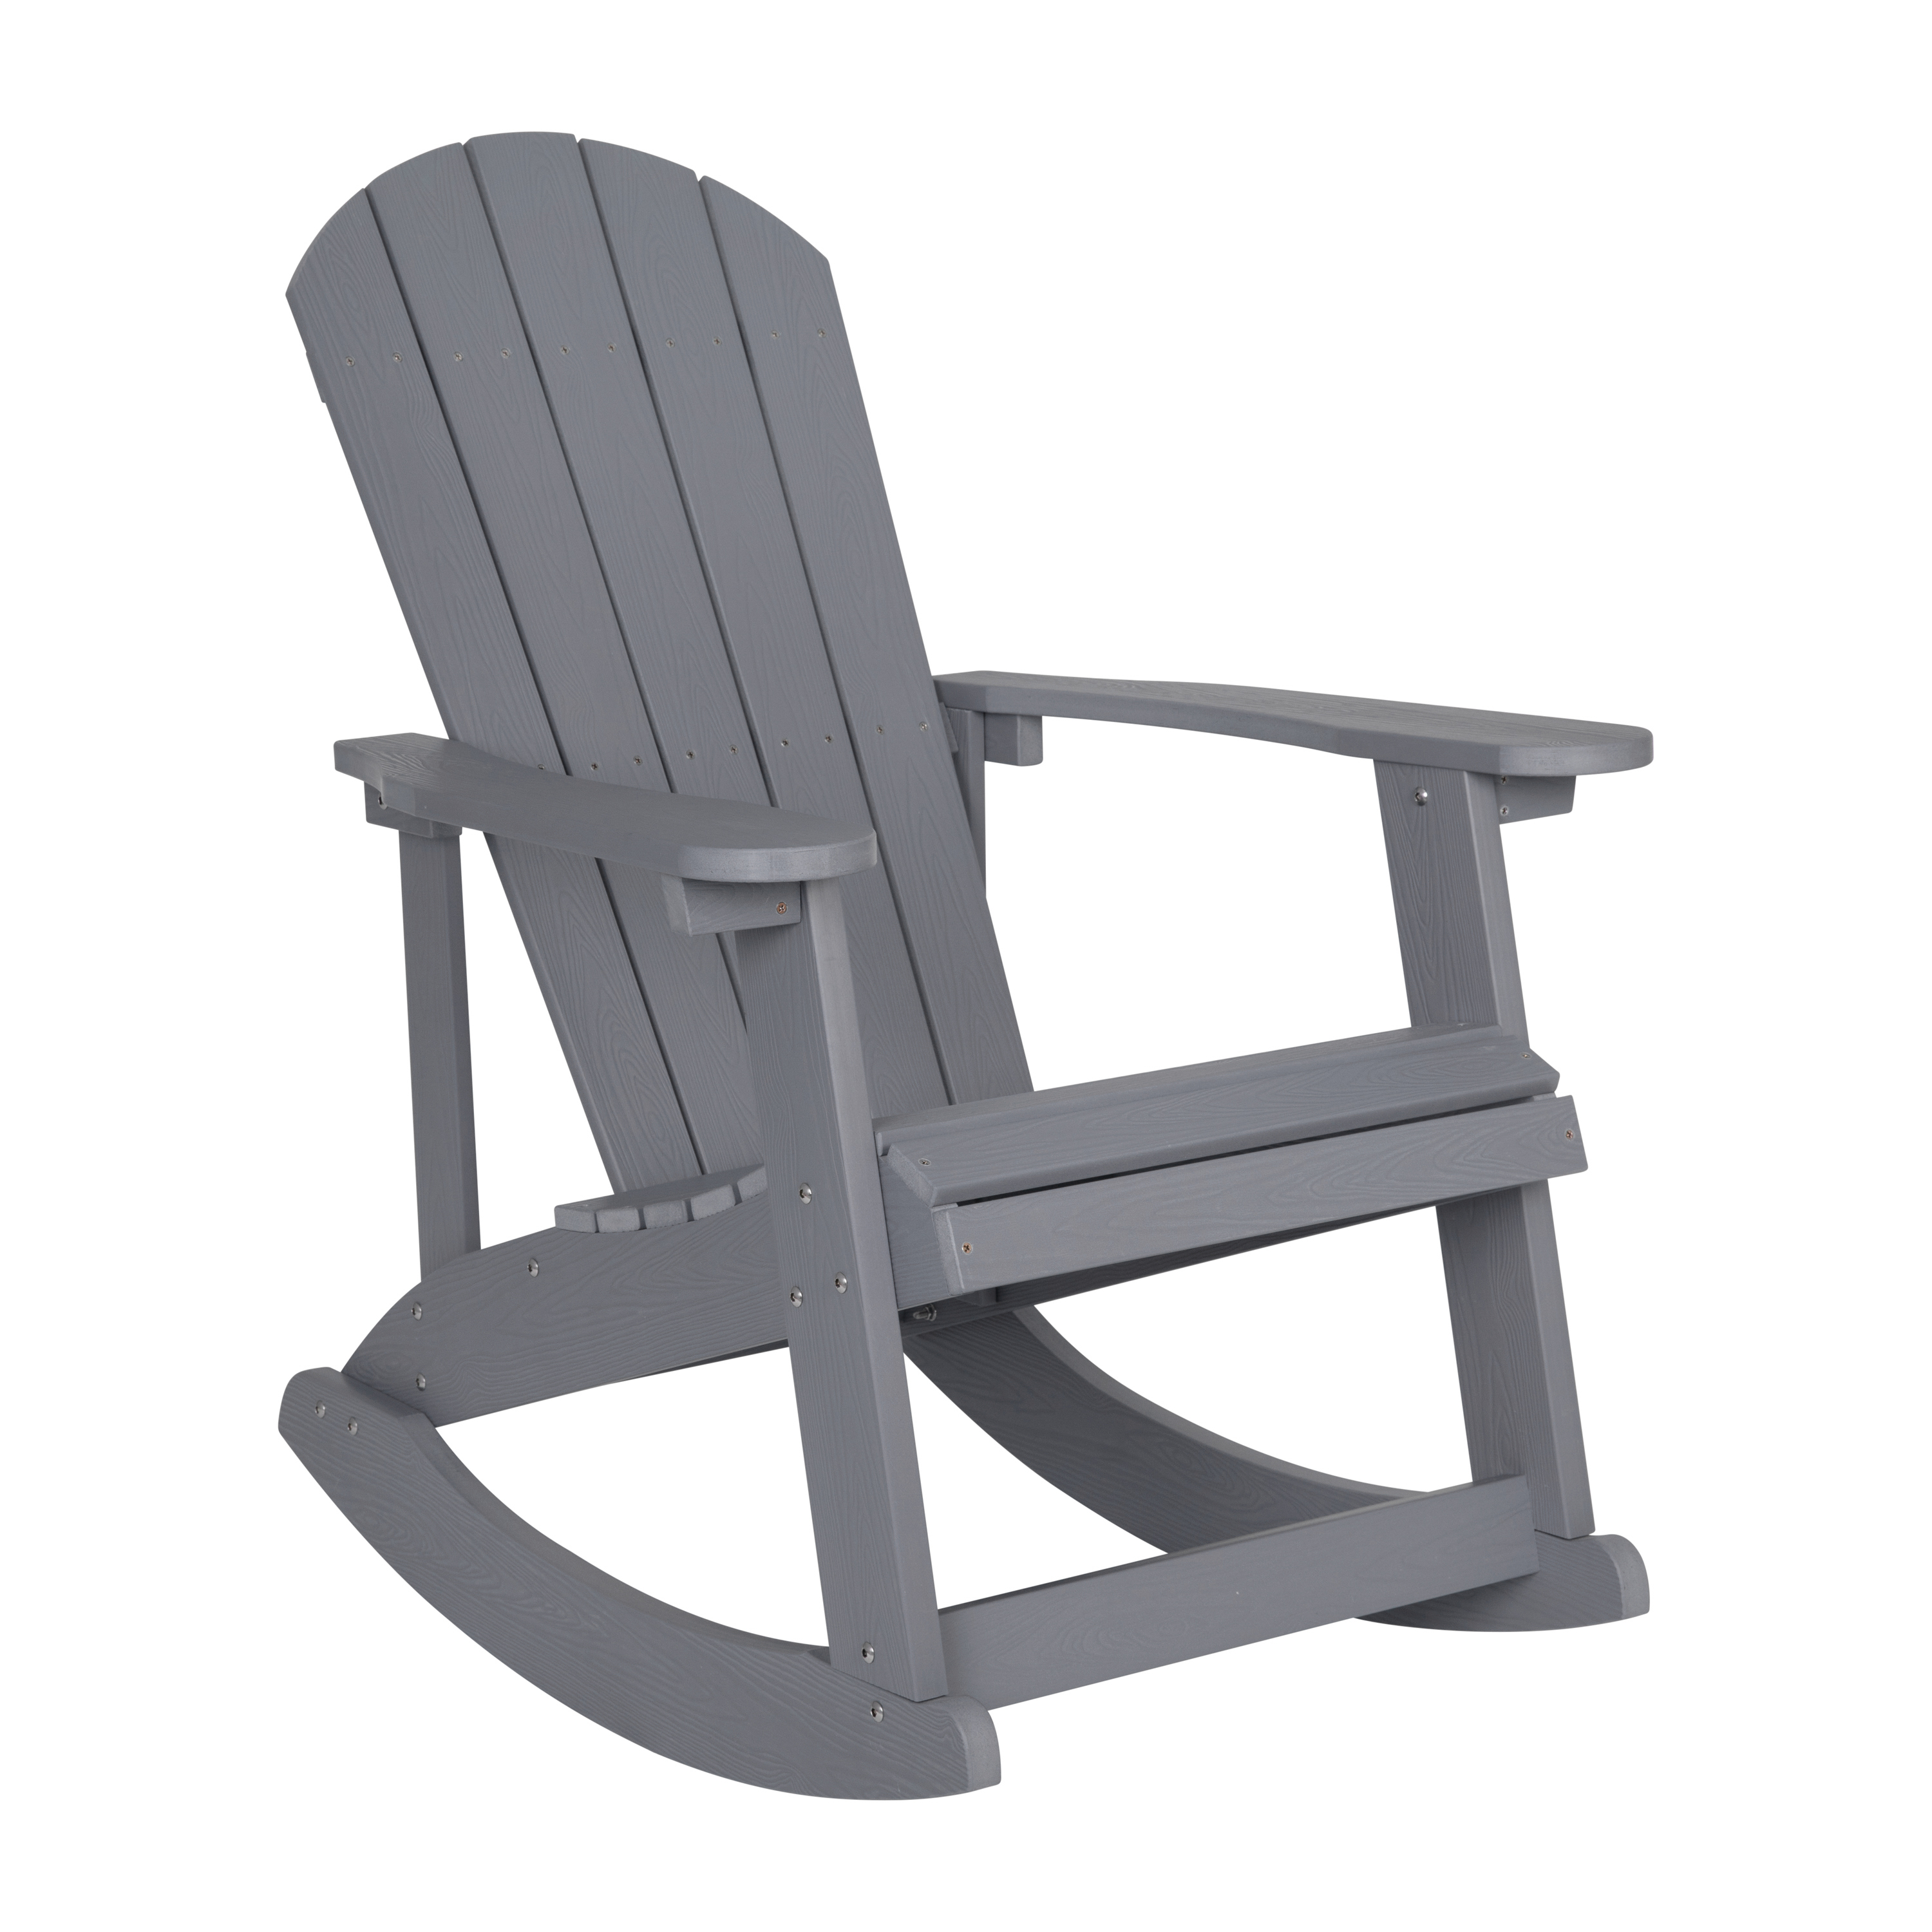 BizChair Commercial Grade All-Weather Poly Resin Wood Adirondack Rocking Chair with Rust Resistant Stainless Steel Hardware in Gray - image 2 of 11